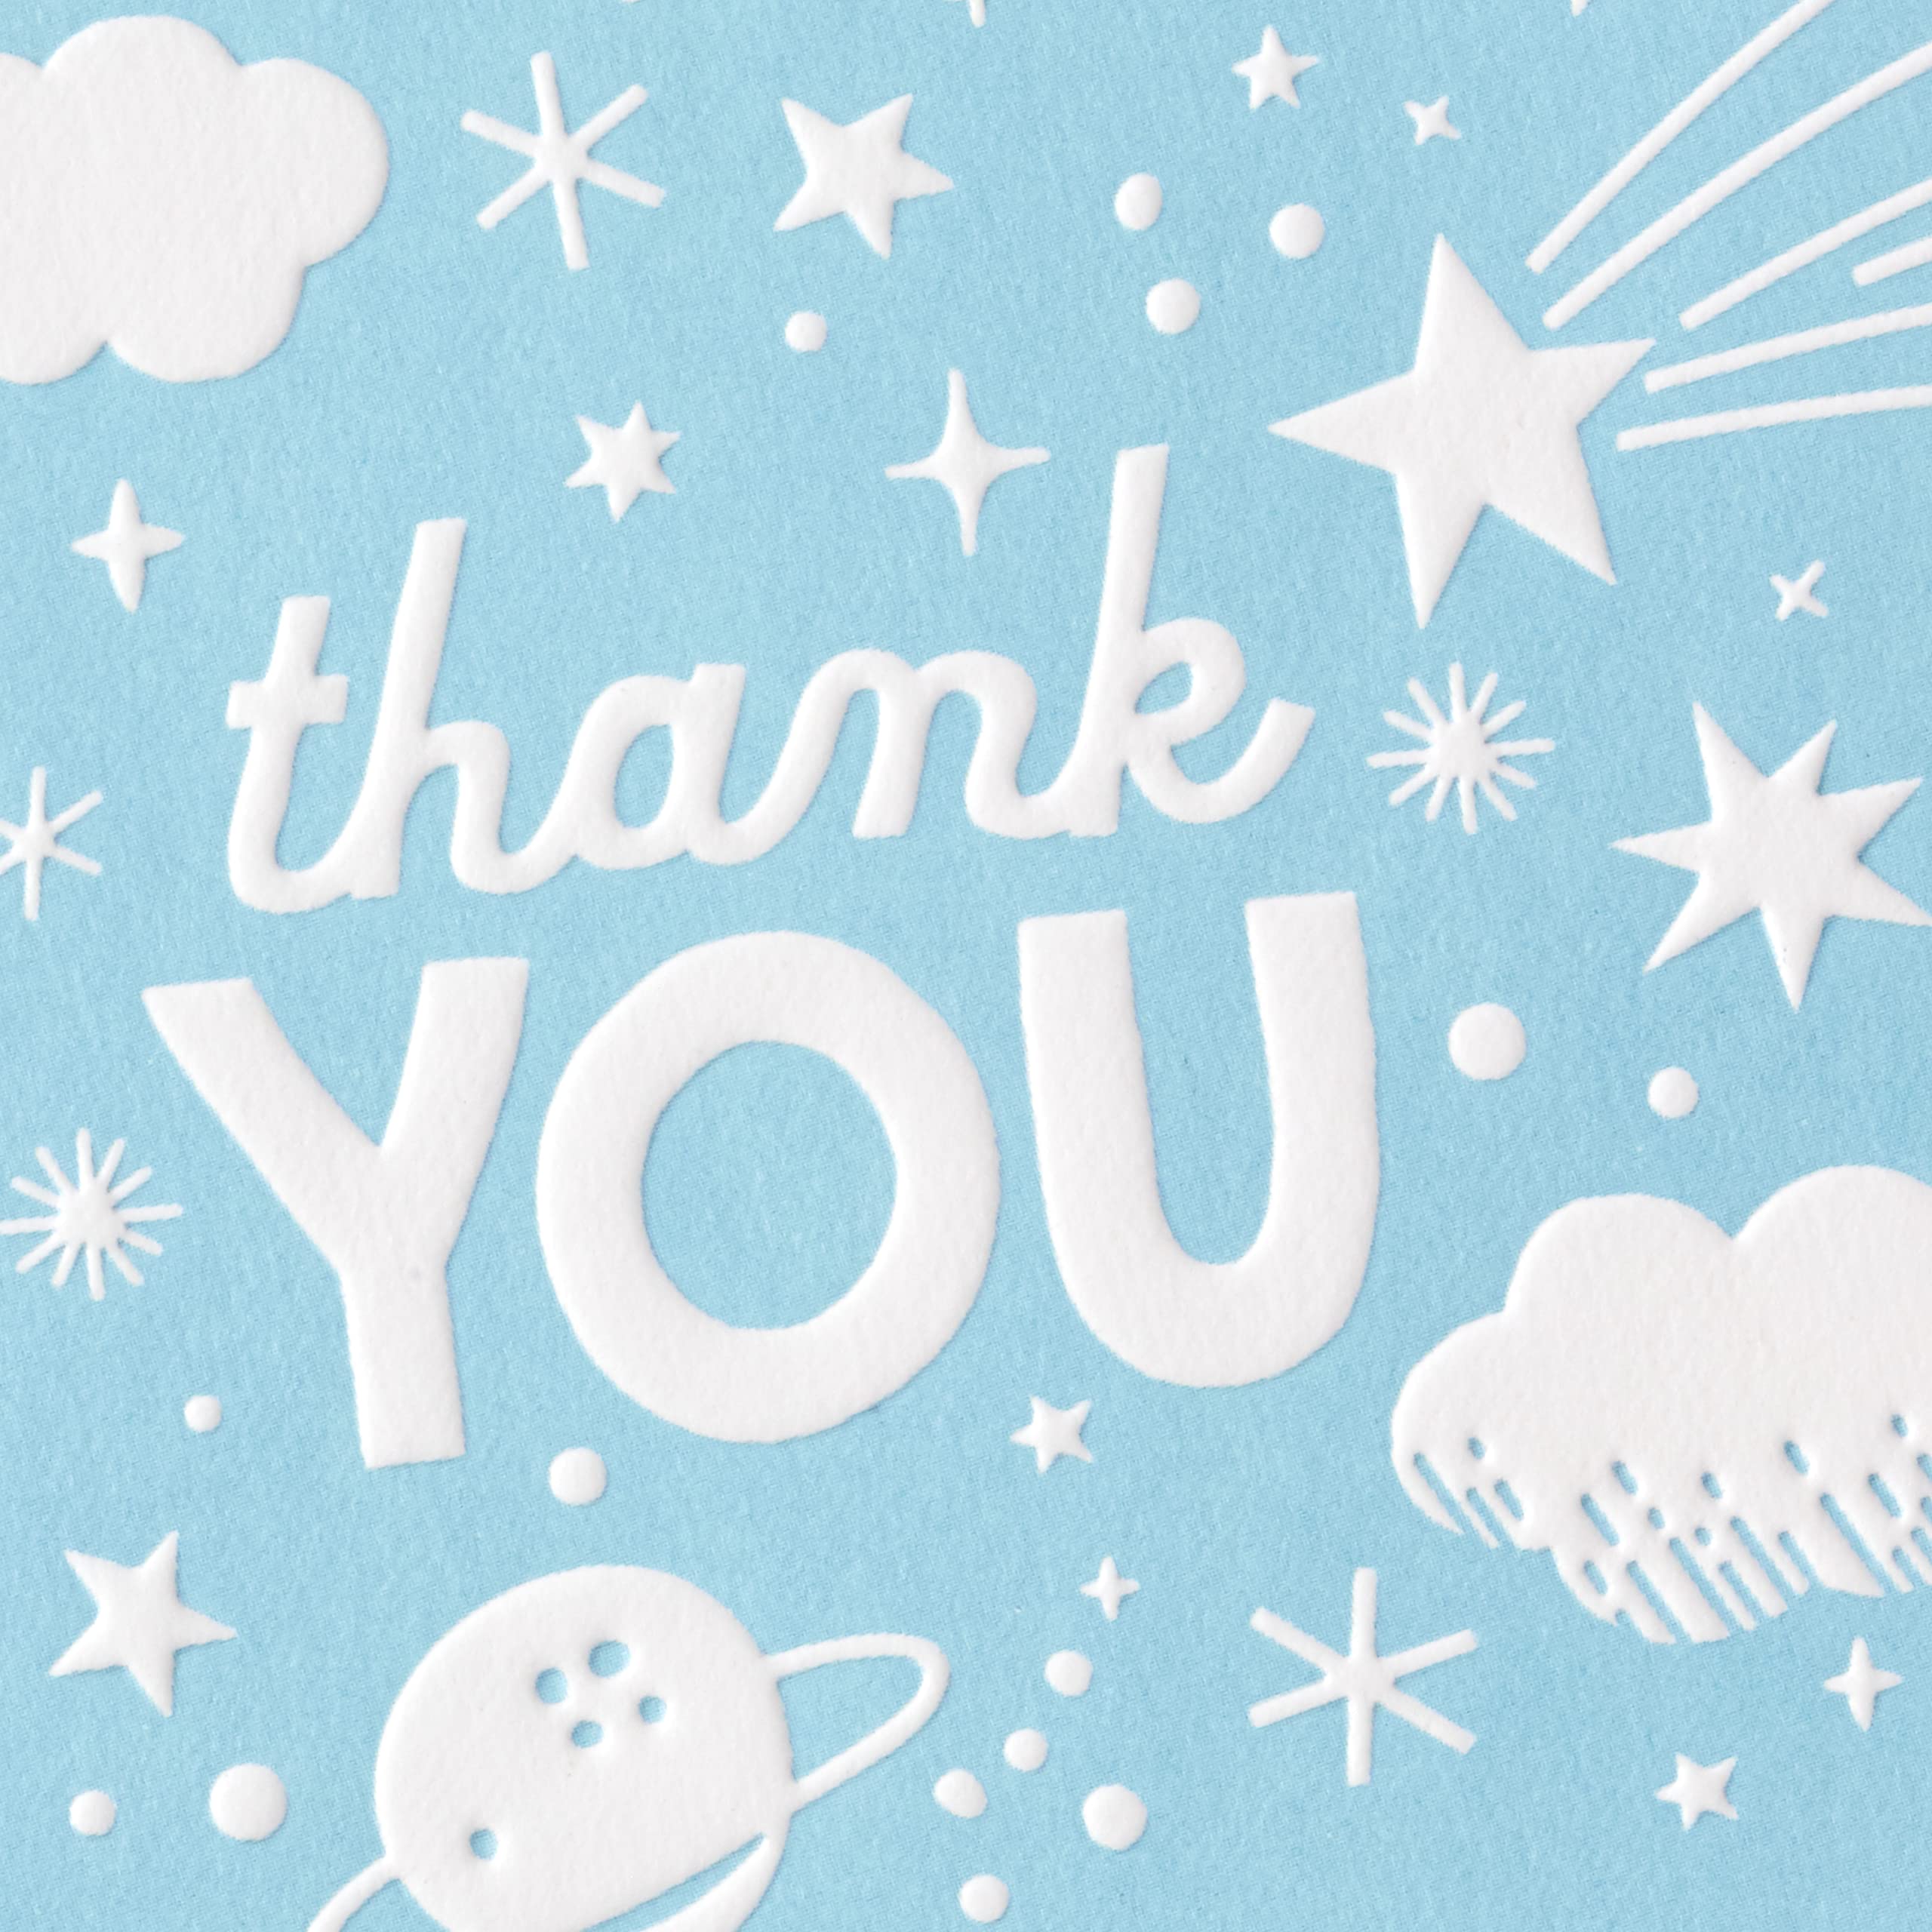 Hallmark Pack of Baby Shower Thank You Cards, Outer Space (20 Thank You Notes and Envelopes)